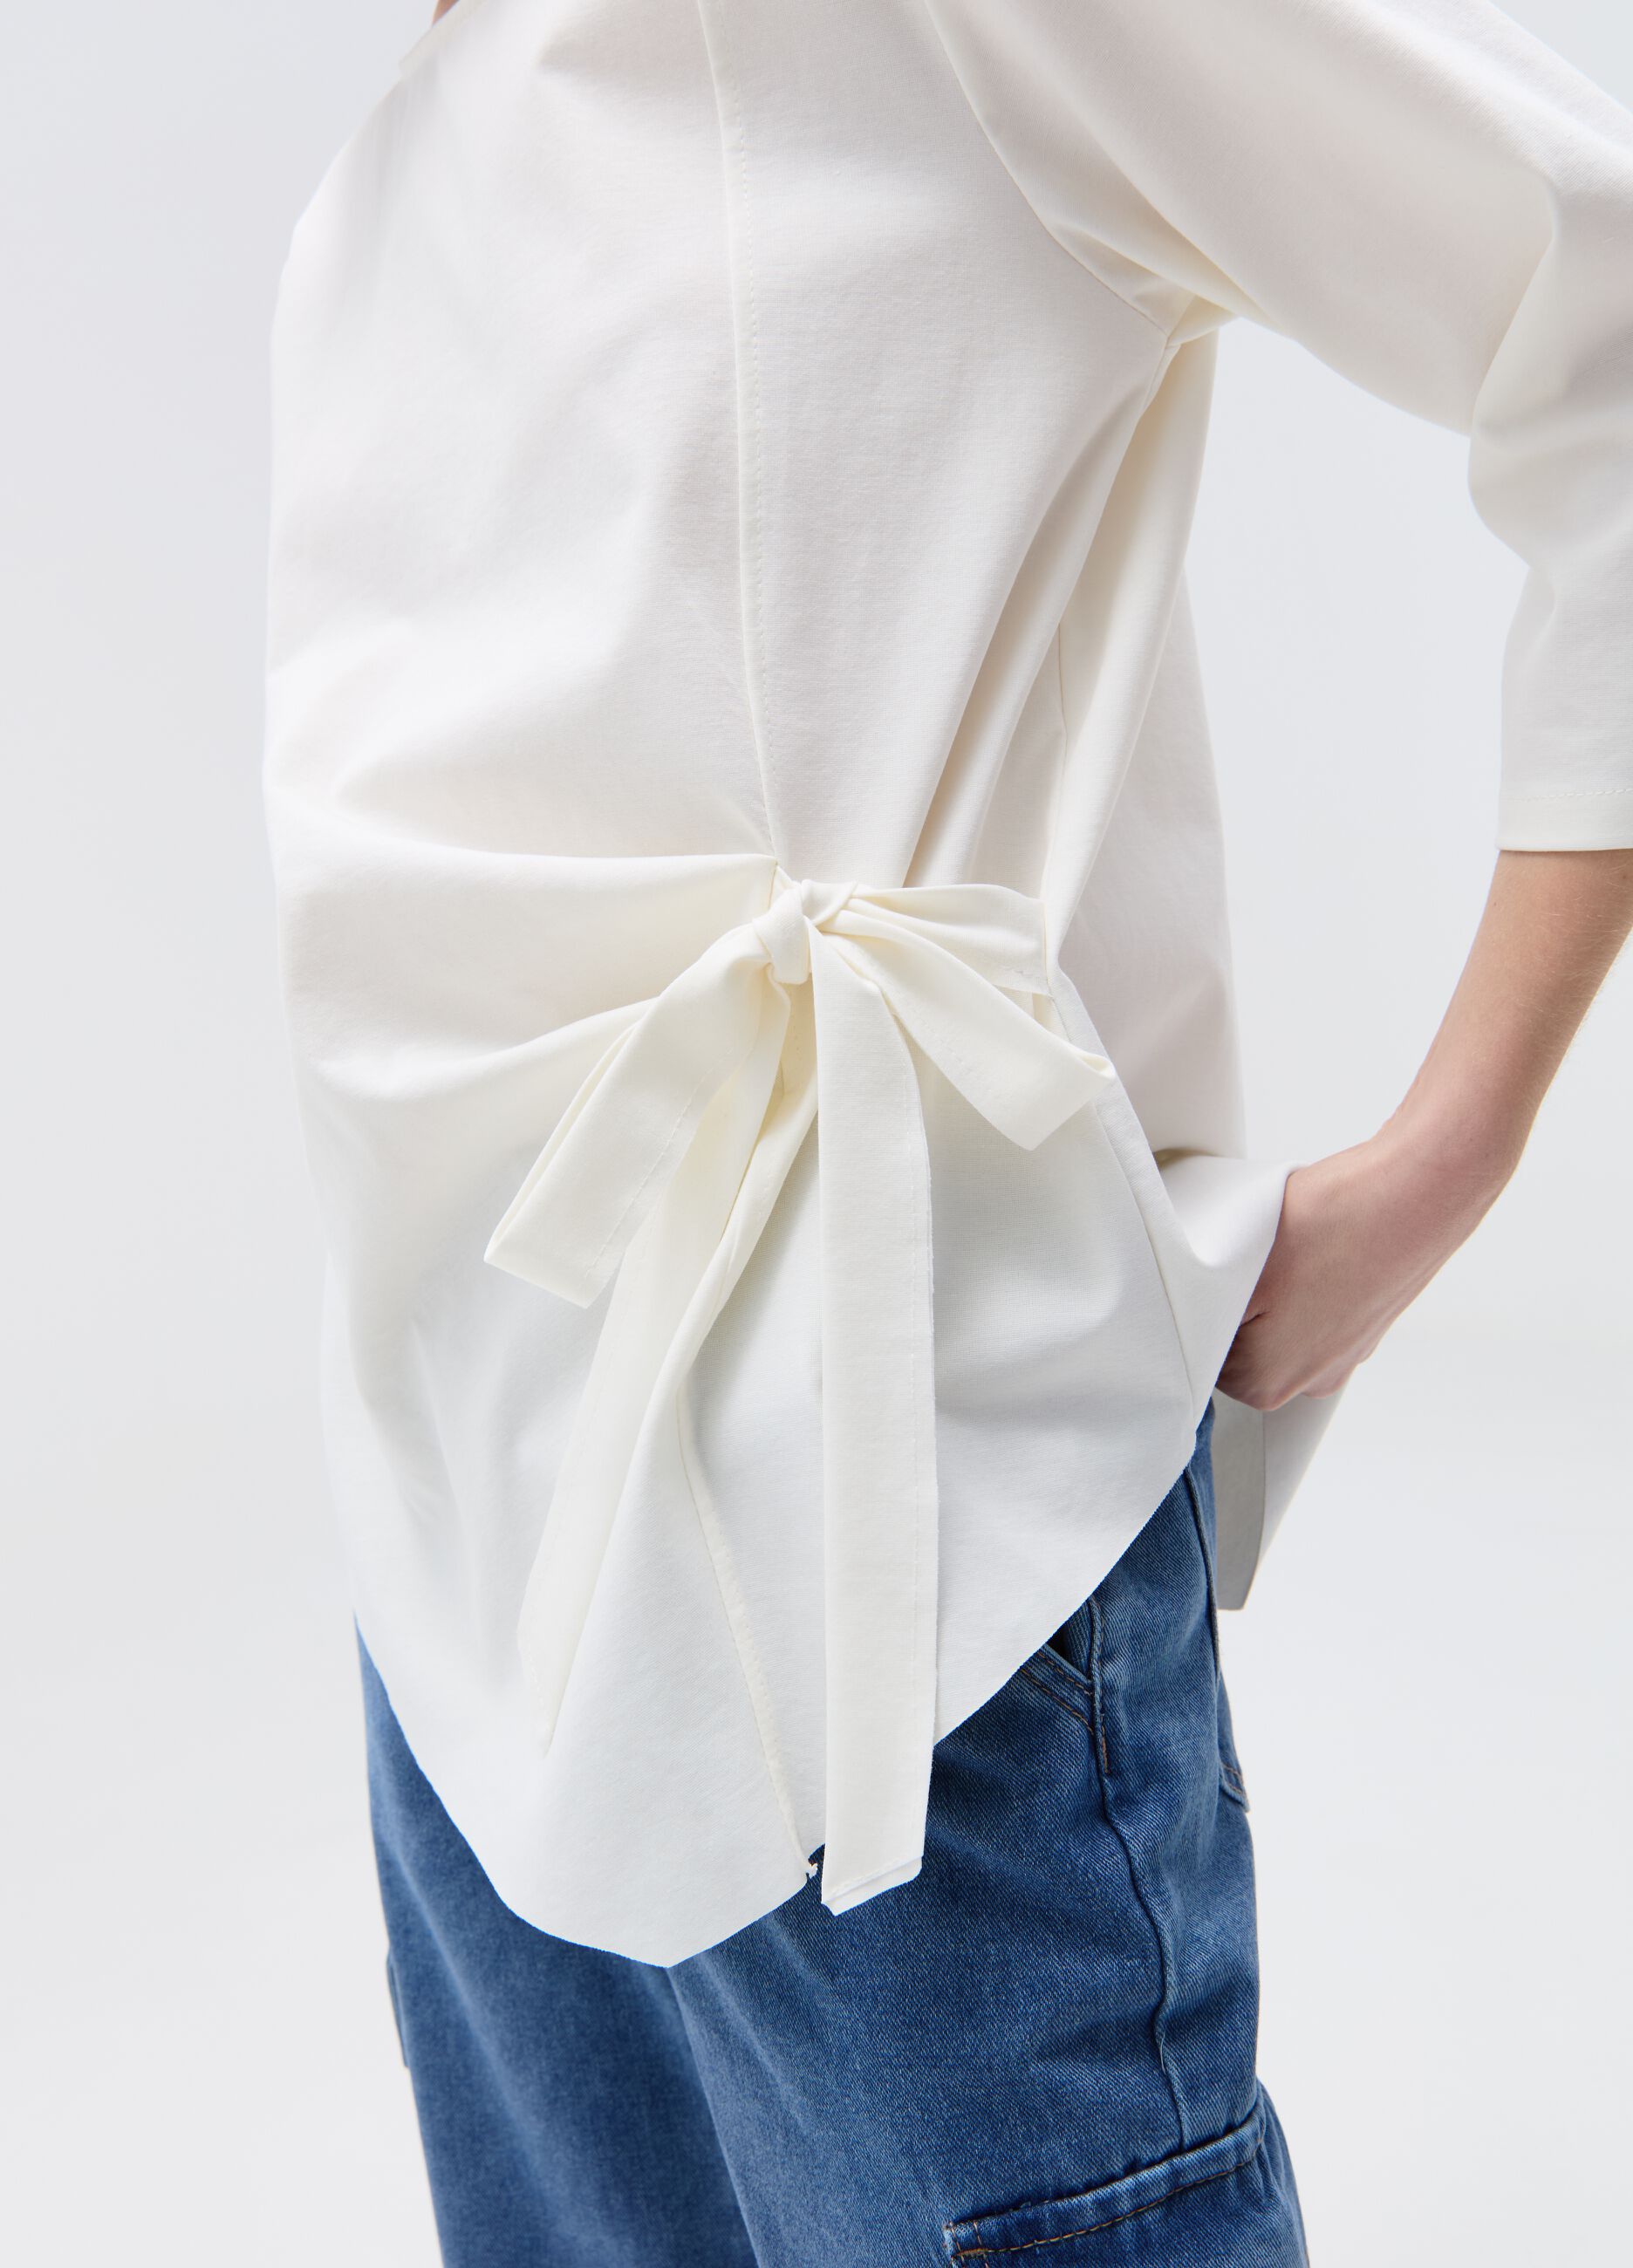 Asymmetric blouse with side bow